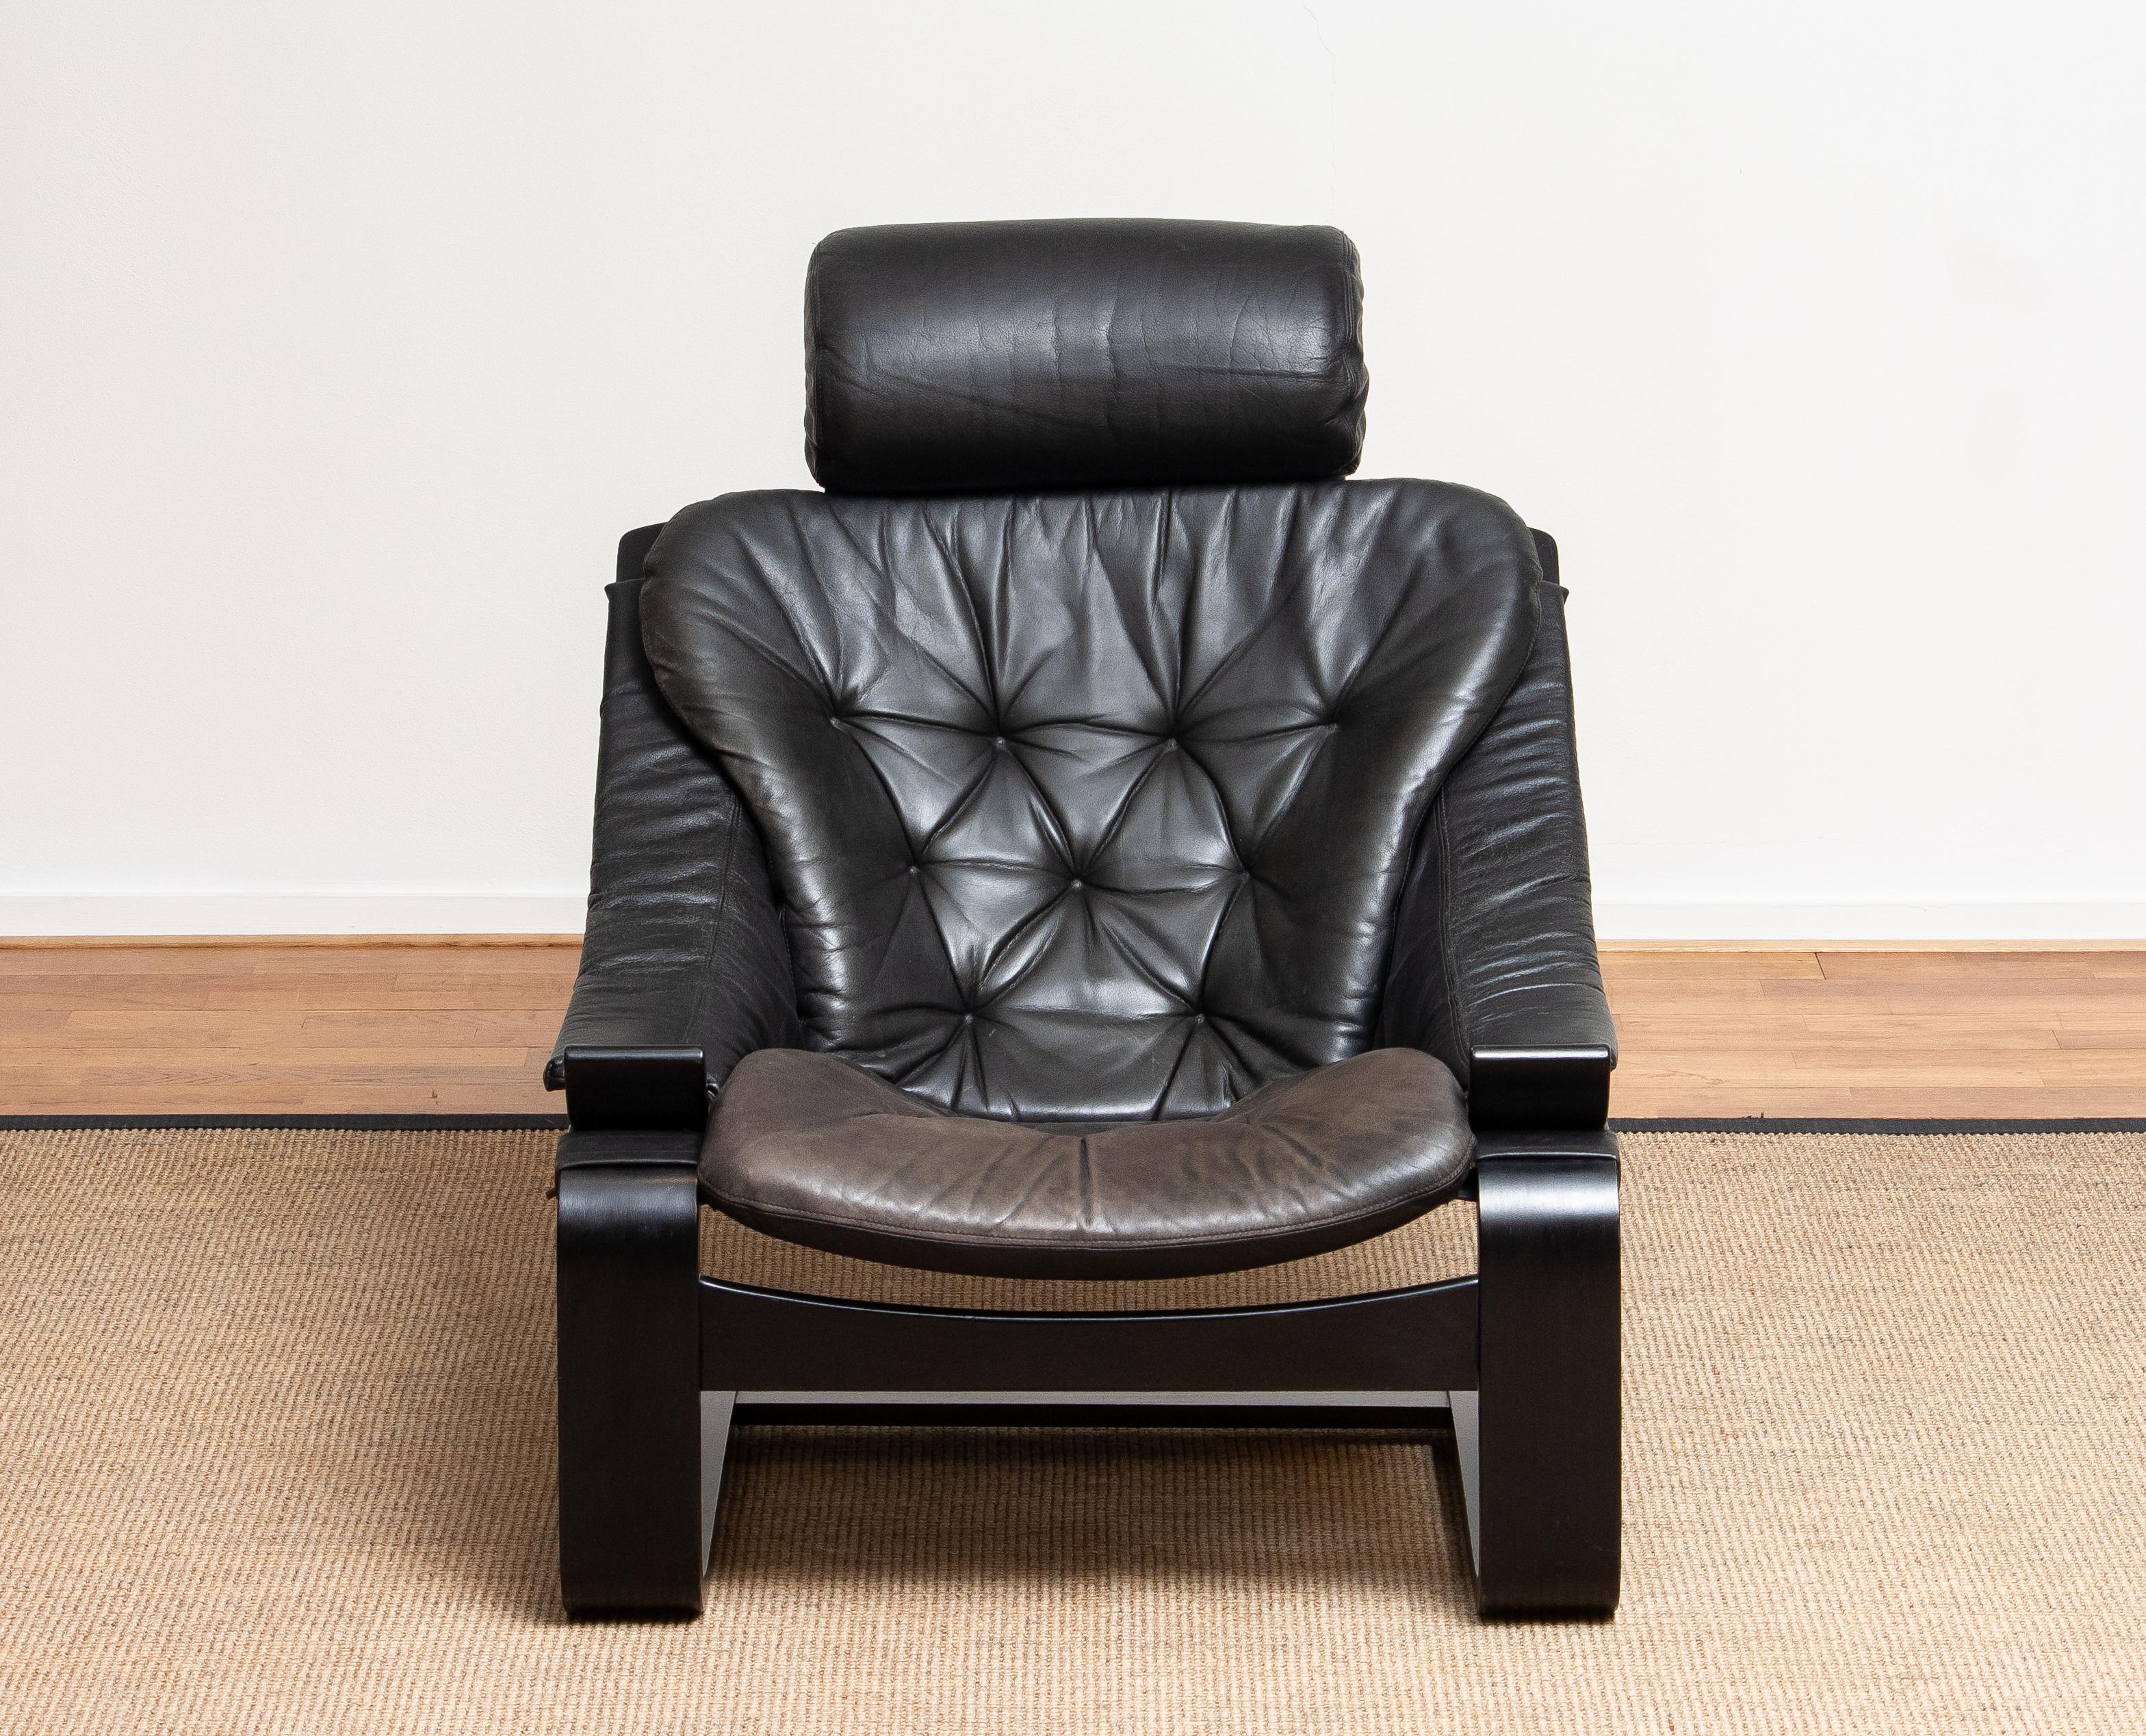 1970s, Black Leather Club Lounge Chair by Ake Fribytter for Nelo, Sweden 1